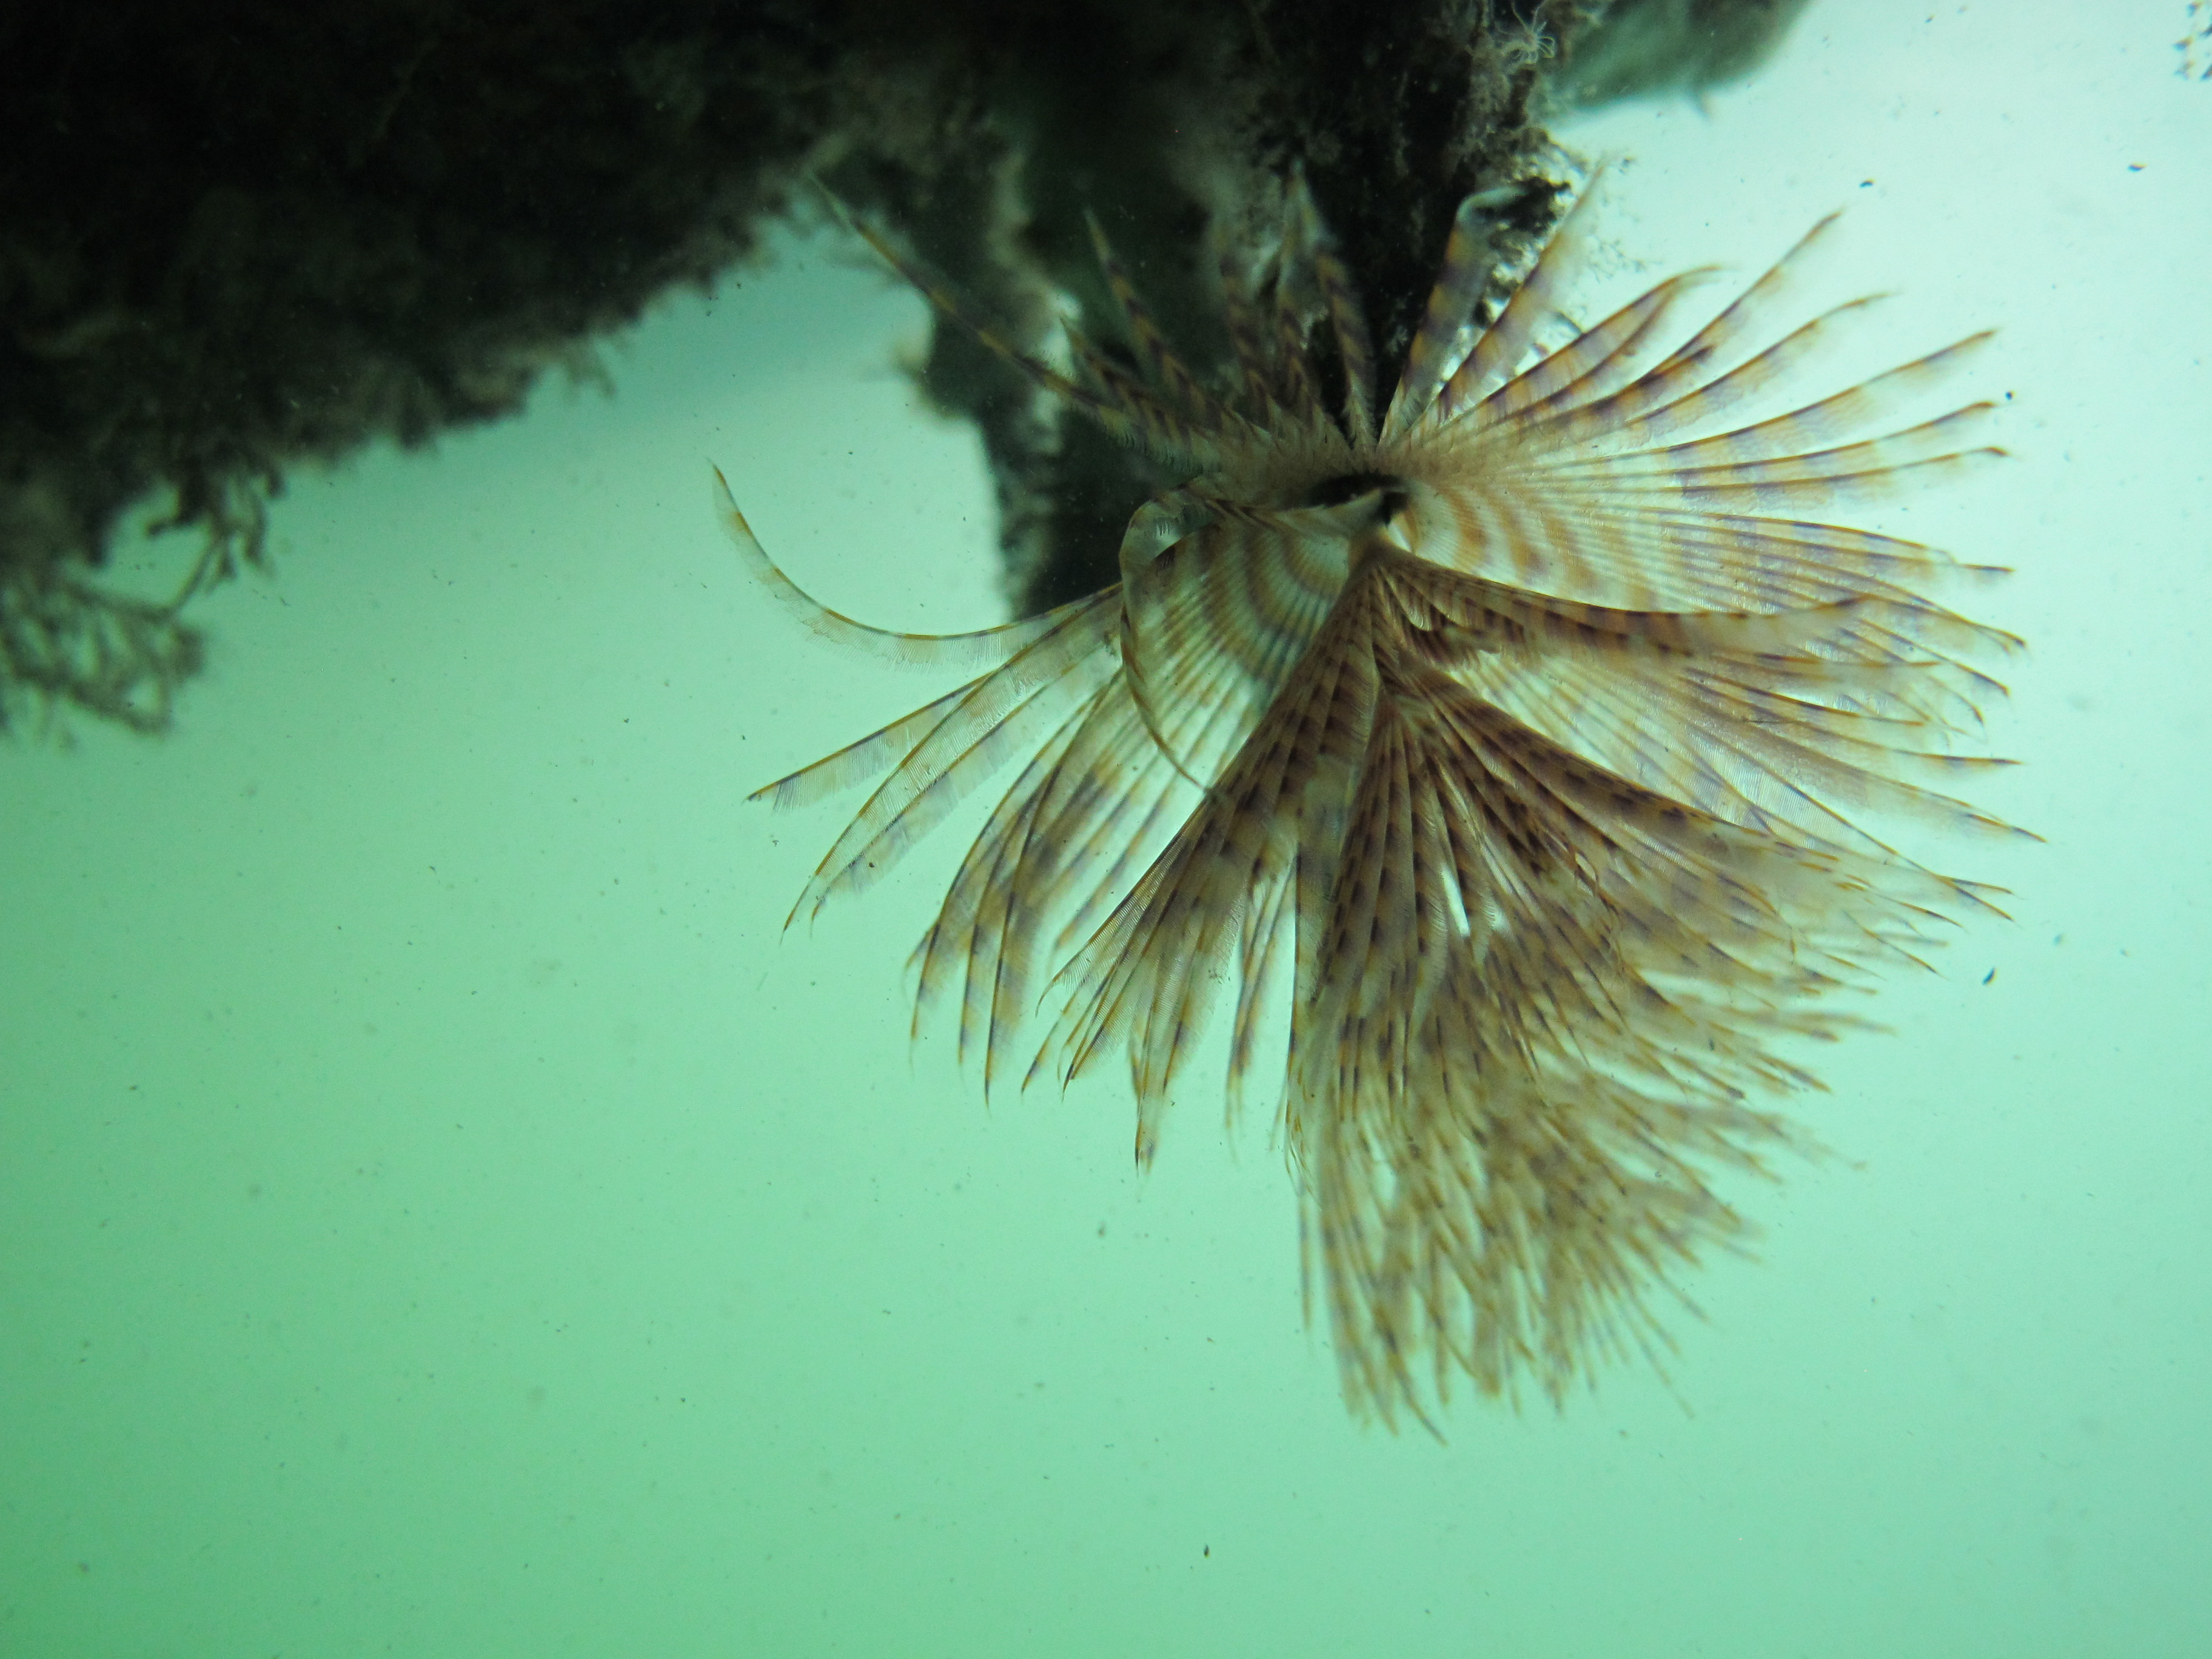 Image of a European fanworm, upside down, hanging from a rock